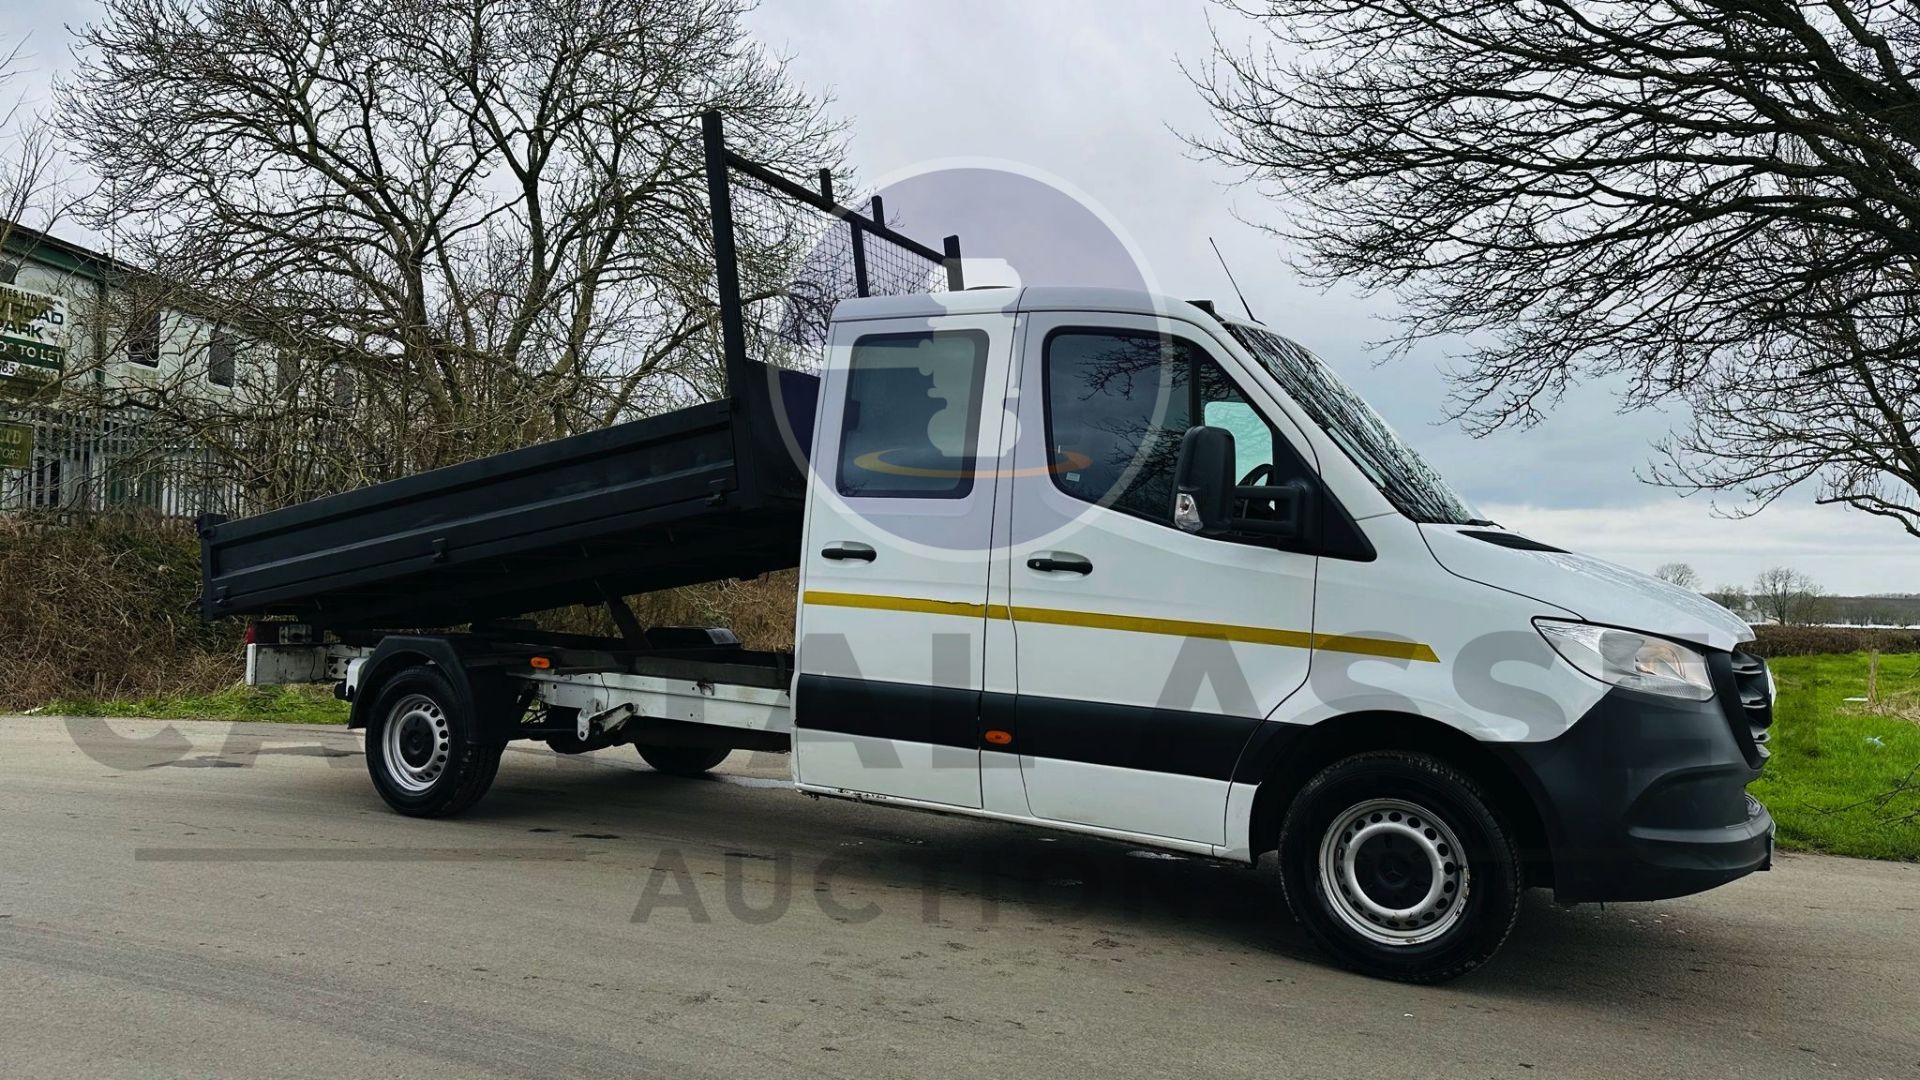 (ON SALE)MERCEDES-BENZ SPRINTER 316 CDI *LWB - DOUBLE CAB TIPPER* (2021 MODEL - EURO 6) - Image 2 of 40